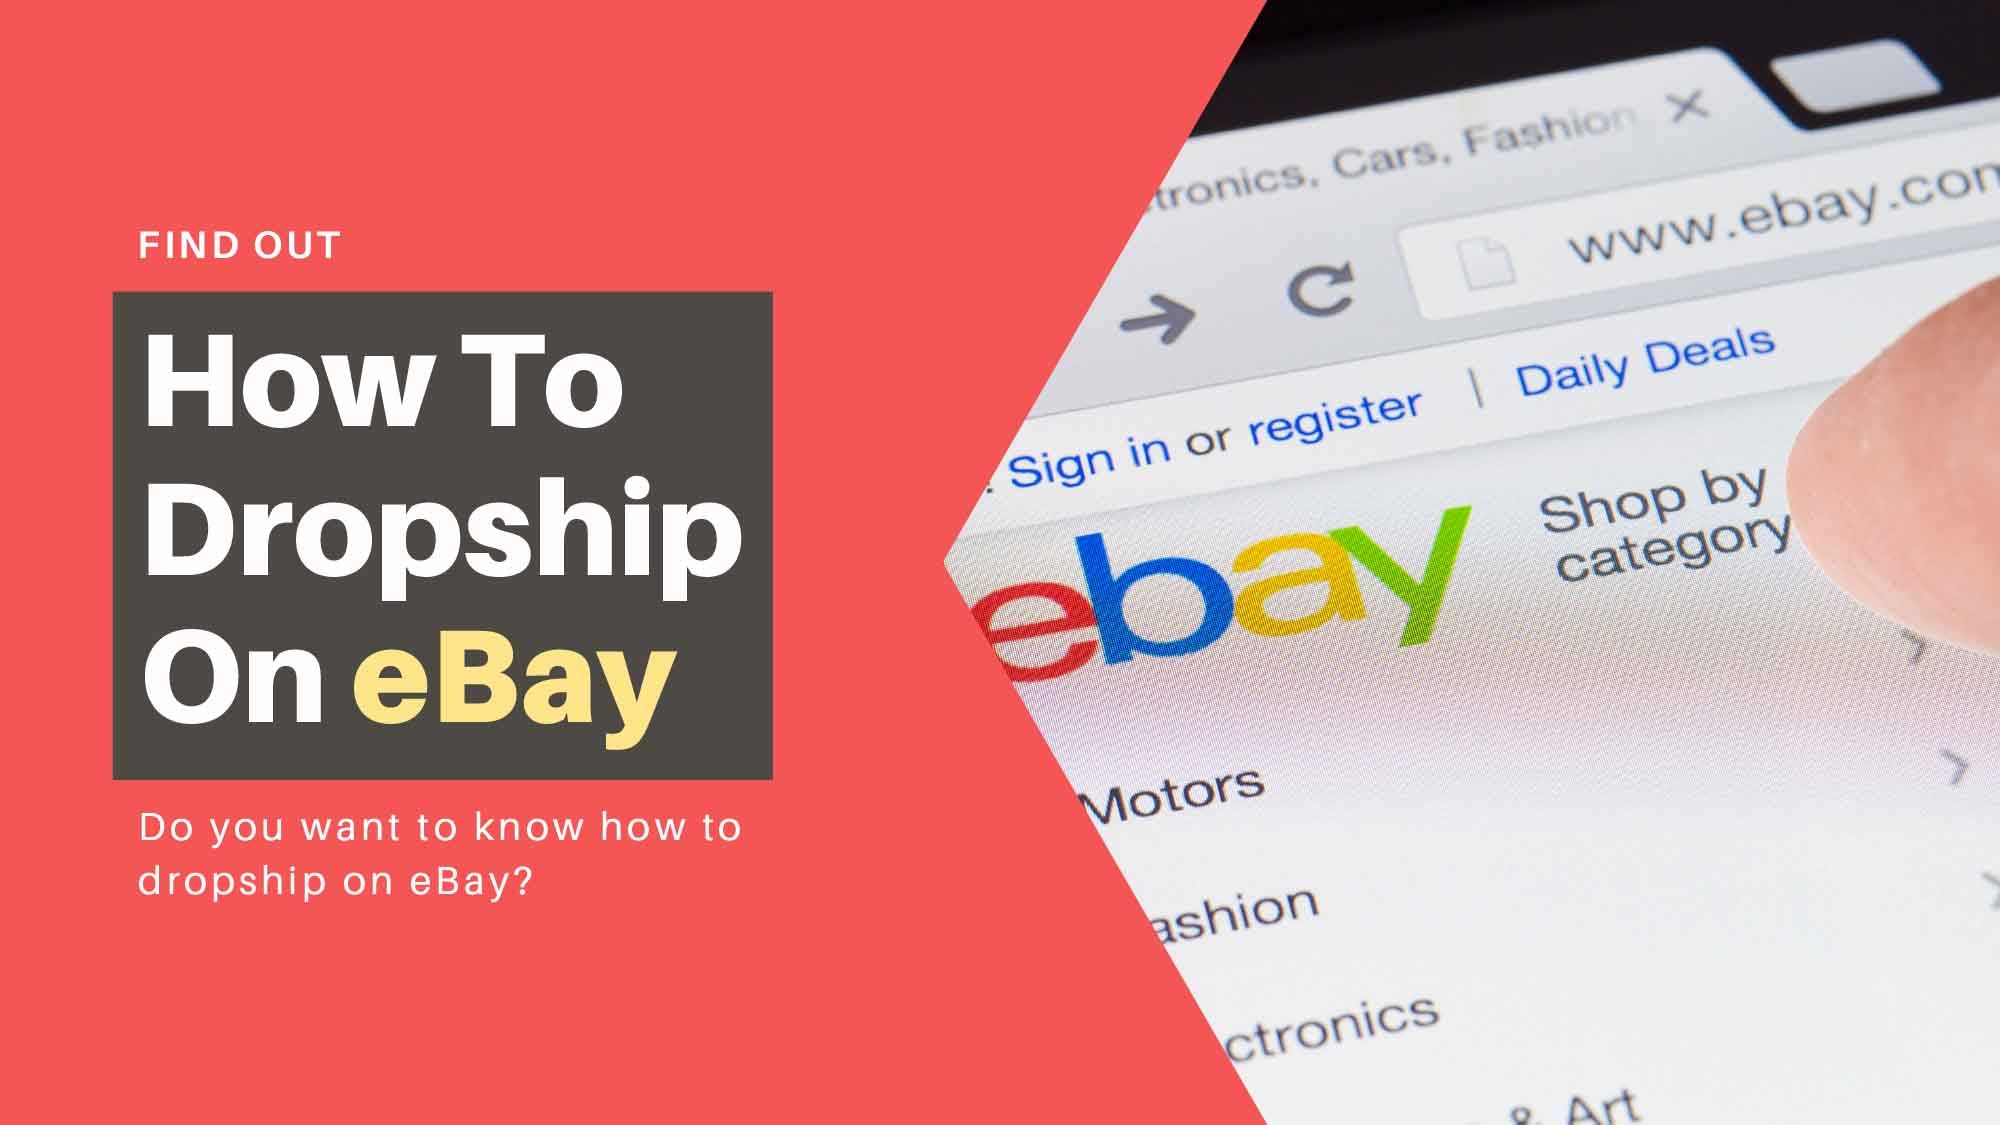 What You Need To Know About Dropshipping On eBay